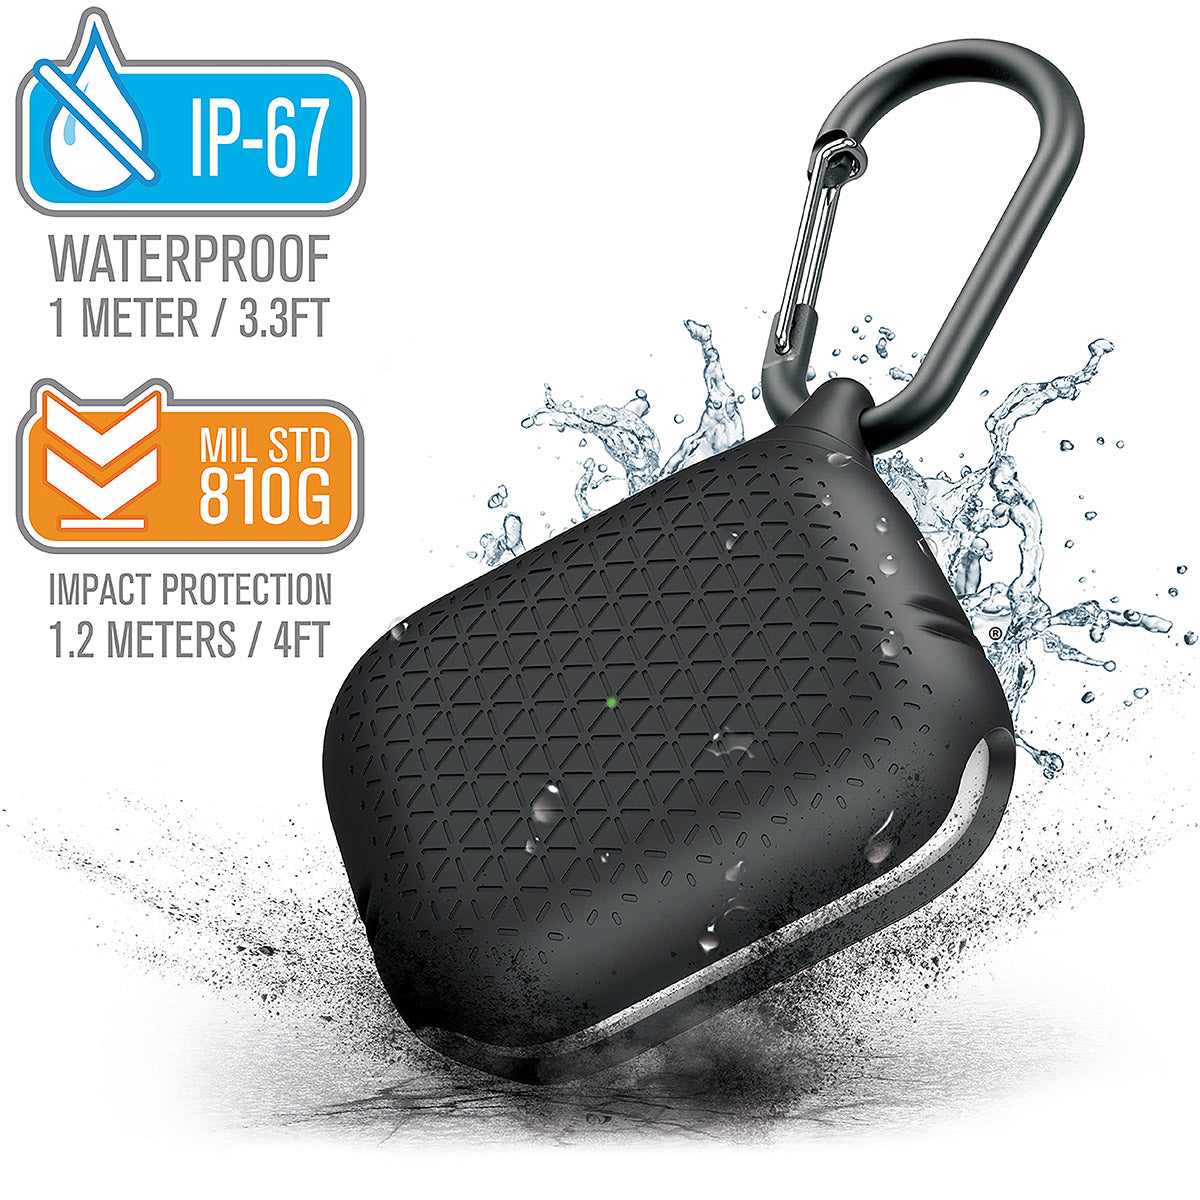 catalyst airpods pro gen 2 1 waterproof case carabiner premium edition stealth black with cracked floor and splashes of water text reads ip-67 waterproof 1 meter 3.3ft mil std 810g impact protection 1.2 meters 4ft